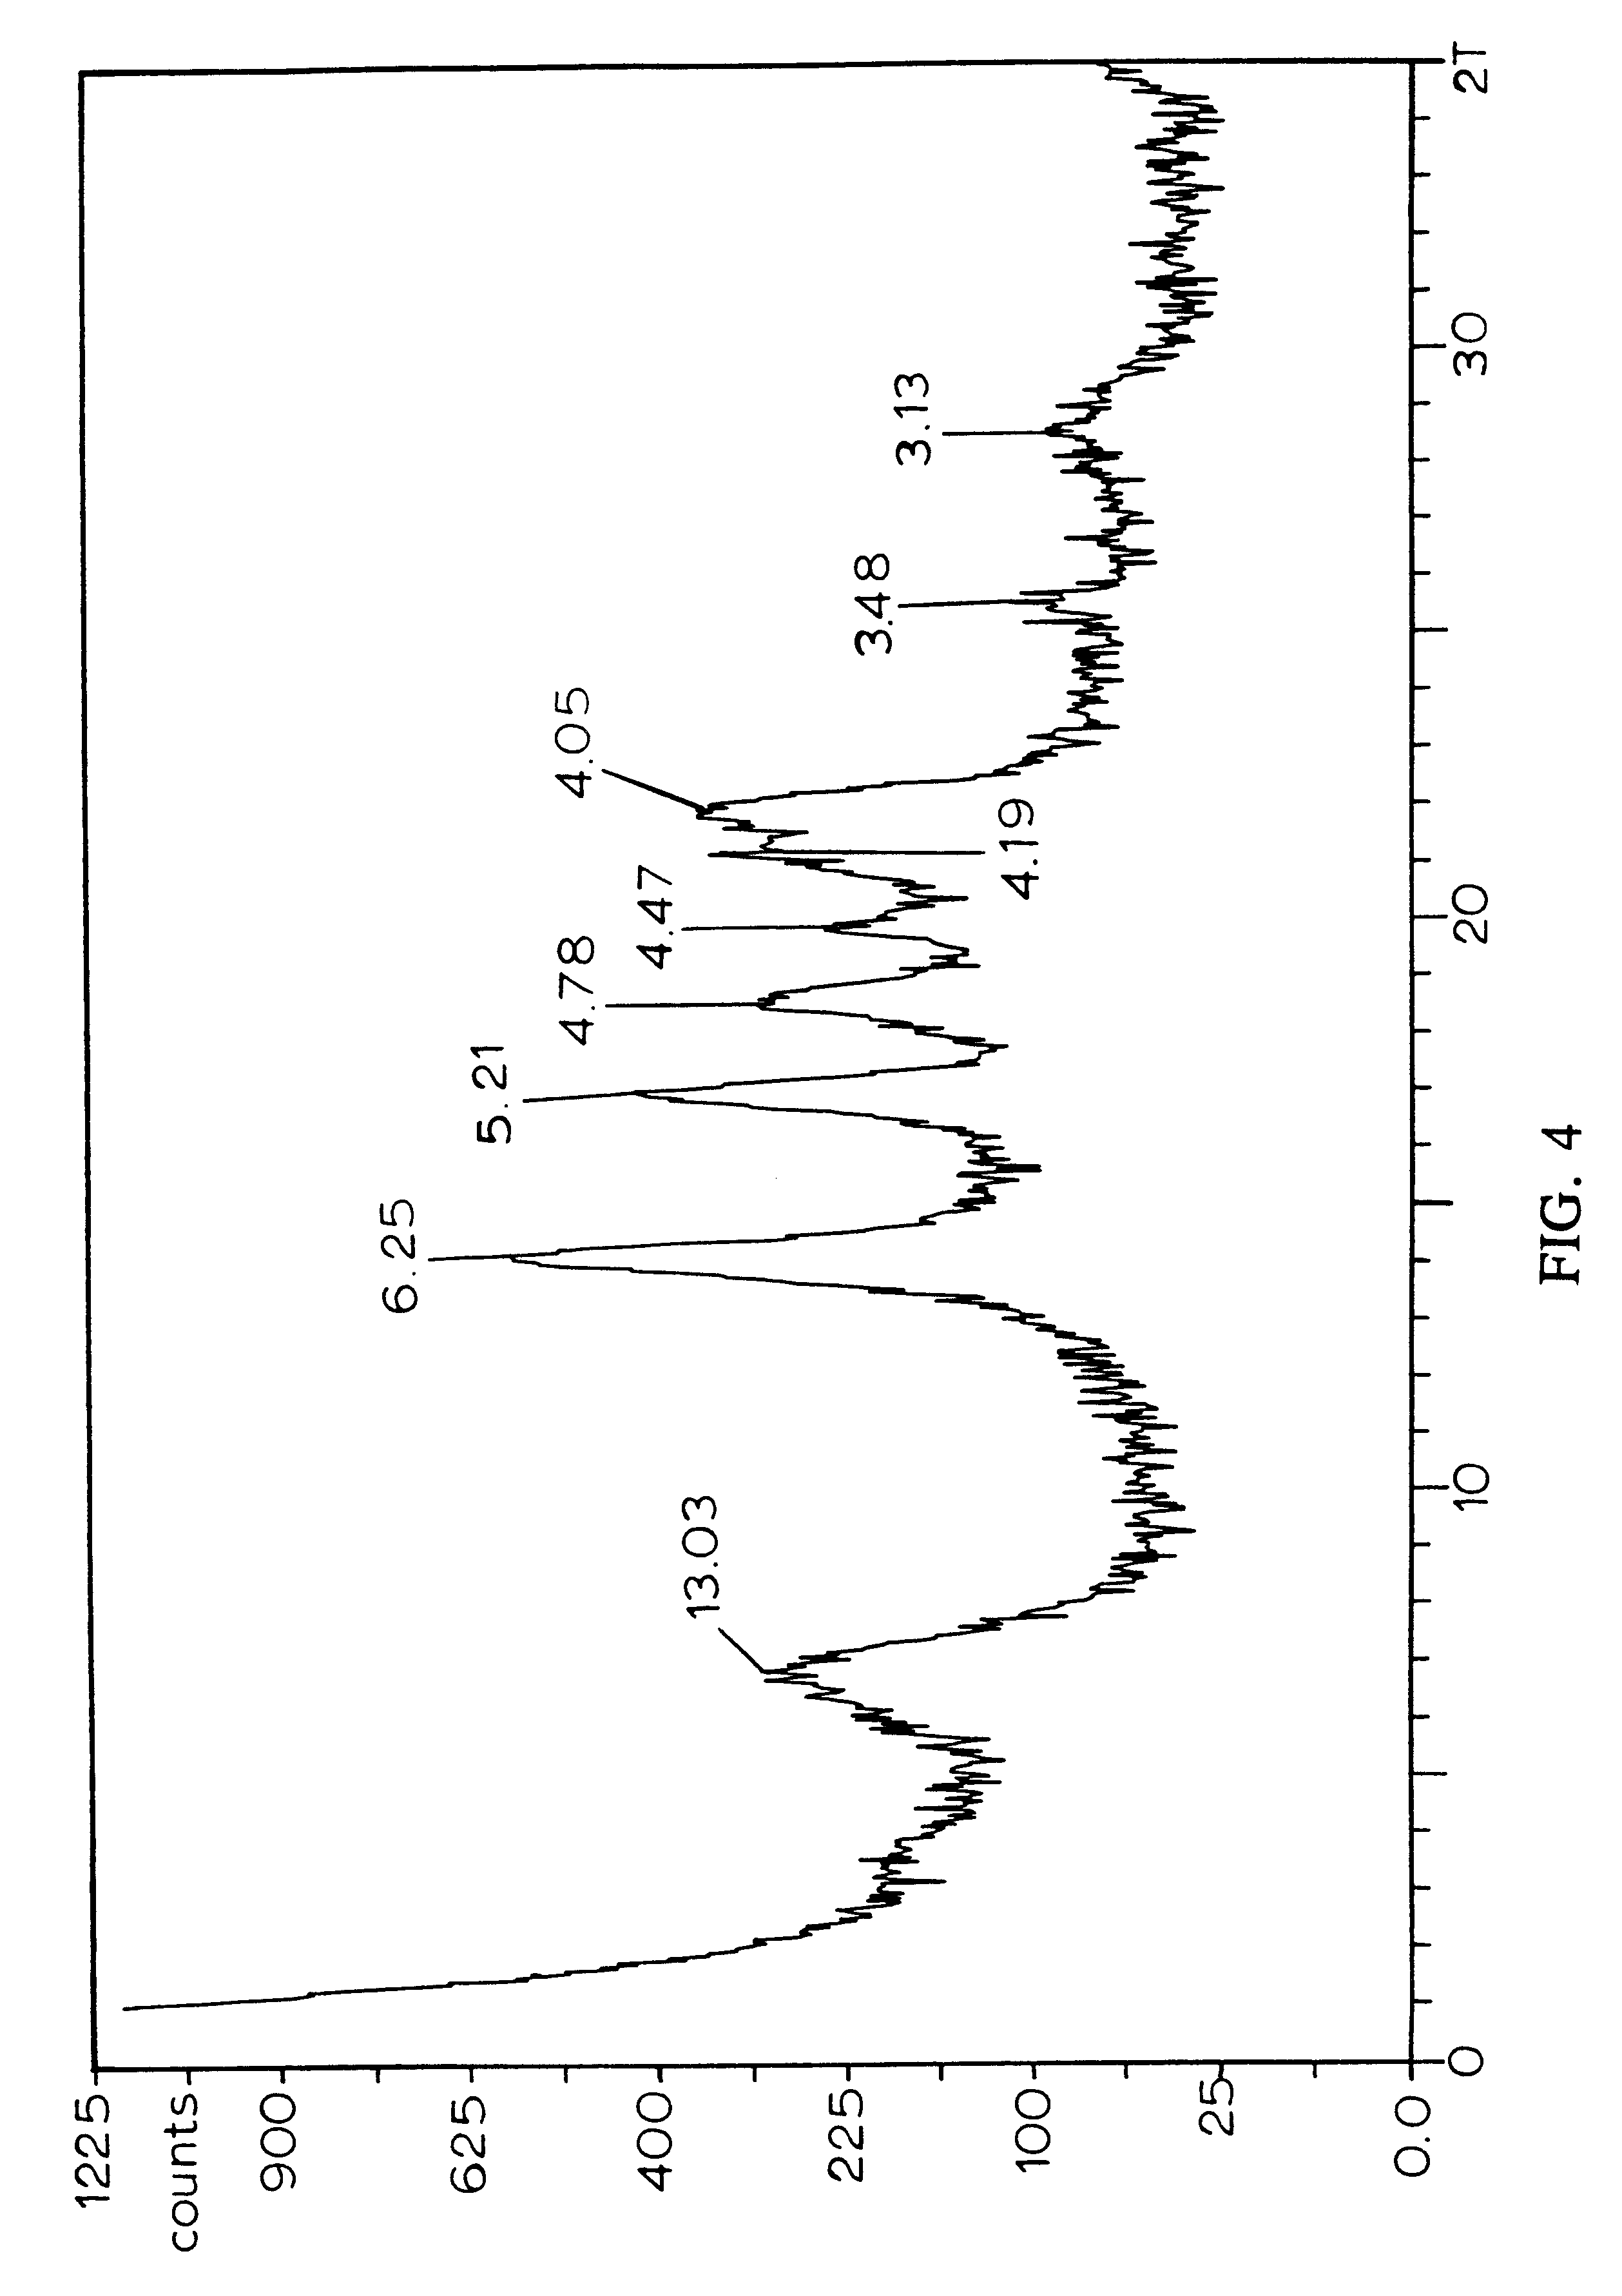 Exfoliated layered materials and nanocomposites comprising said exfoliated layered materials having water-insoluble oligomers or polymers adhered thereto